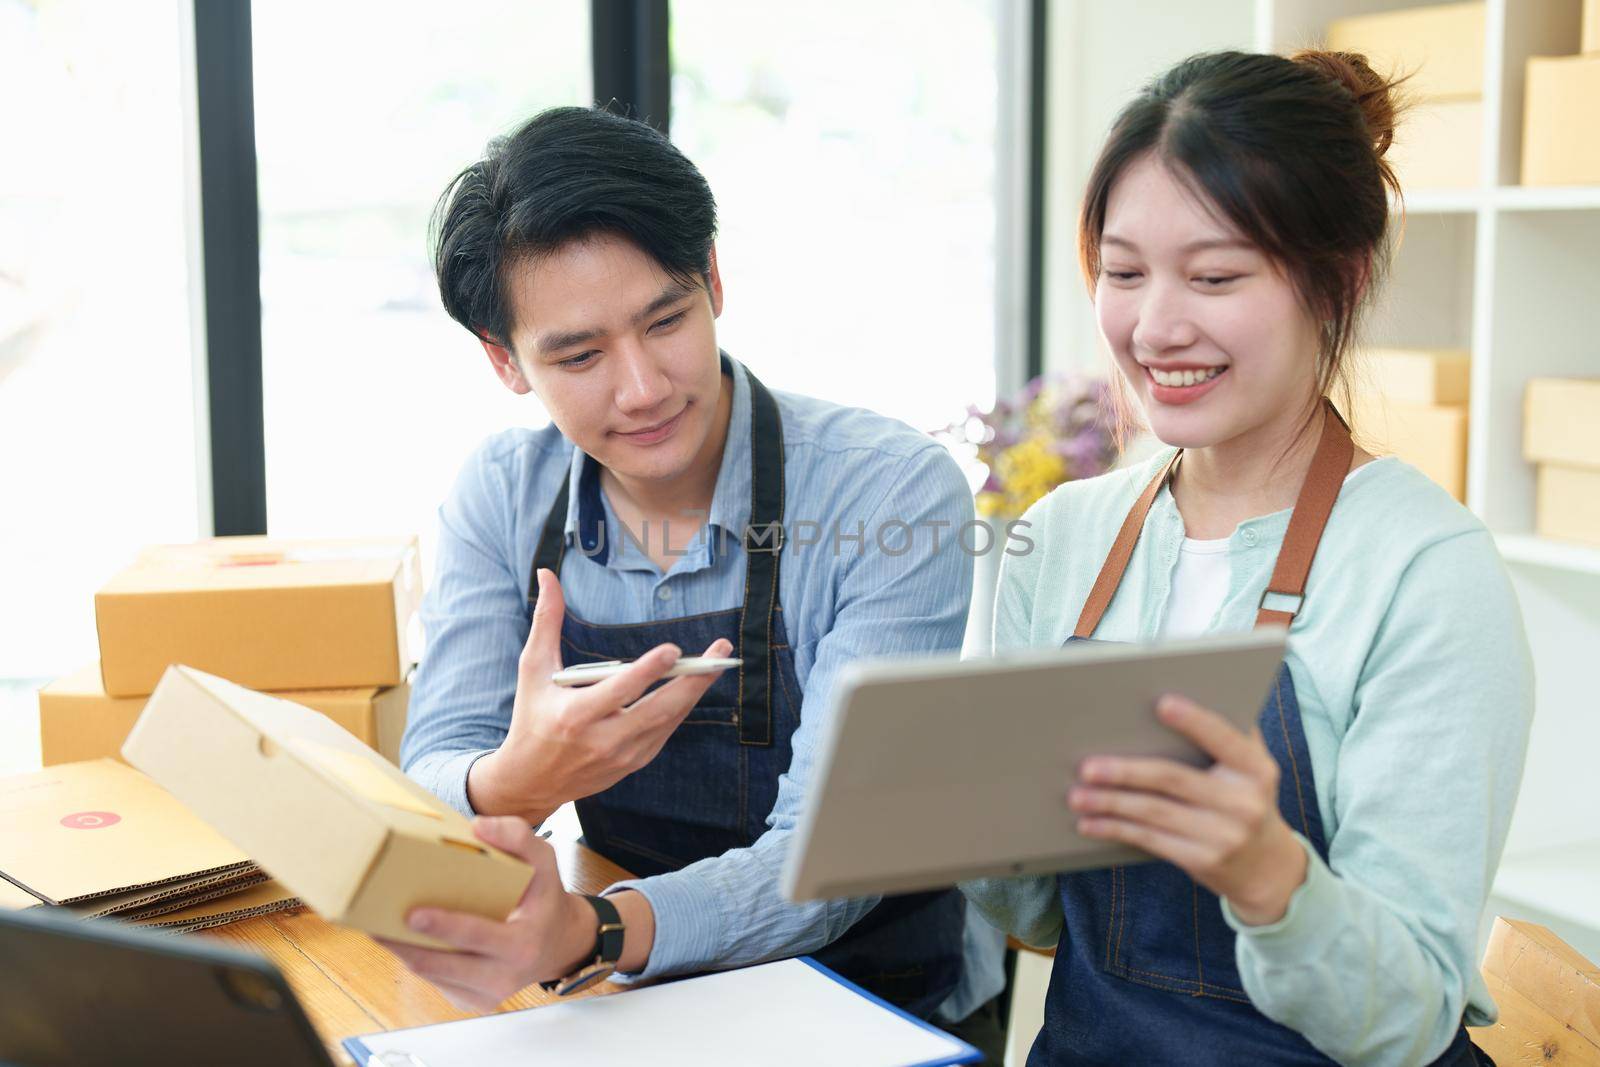 Portrait of a small start-up and SME owner, an Asian male and female entrepreneur checking orders and packing for customers, self-employed, freelance, online selling by Manastrong